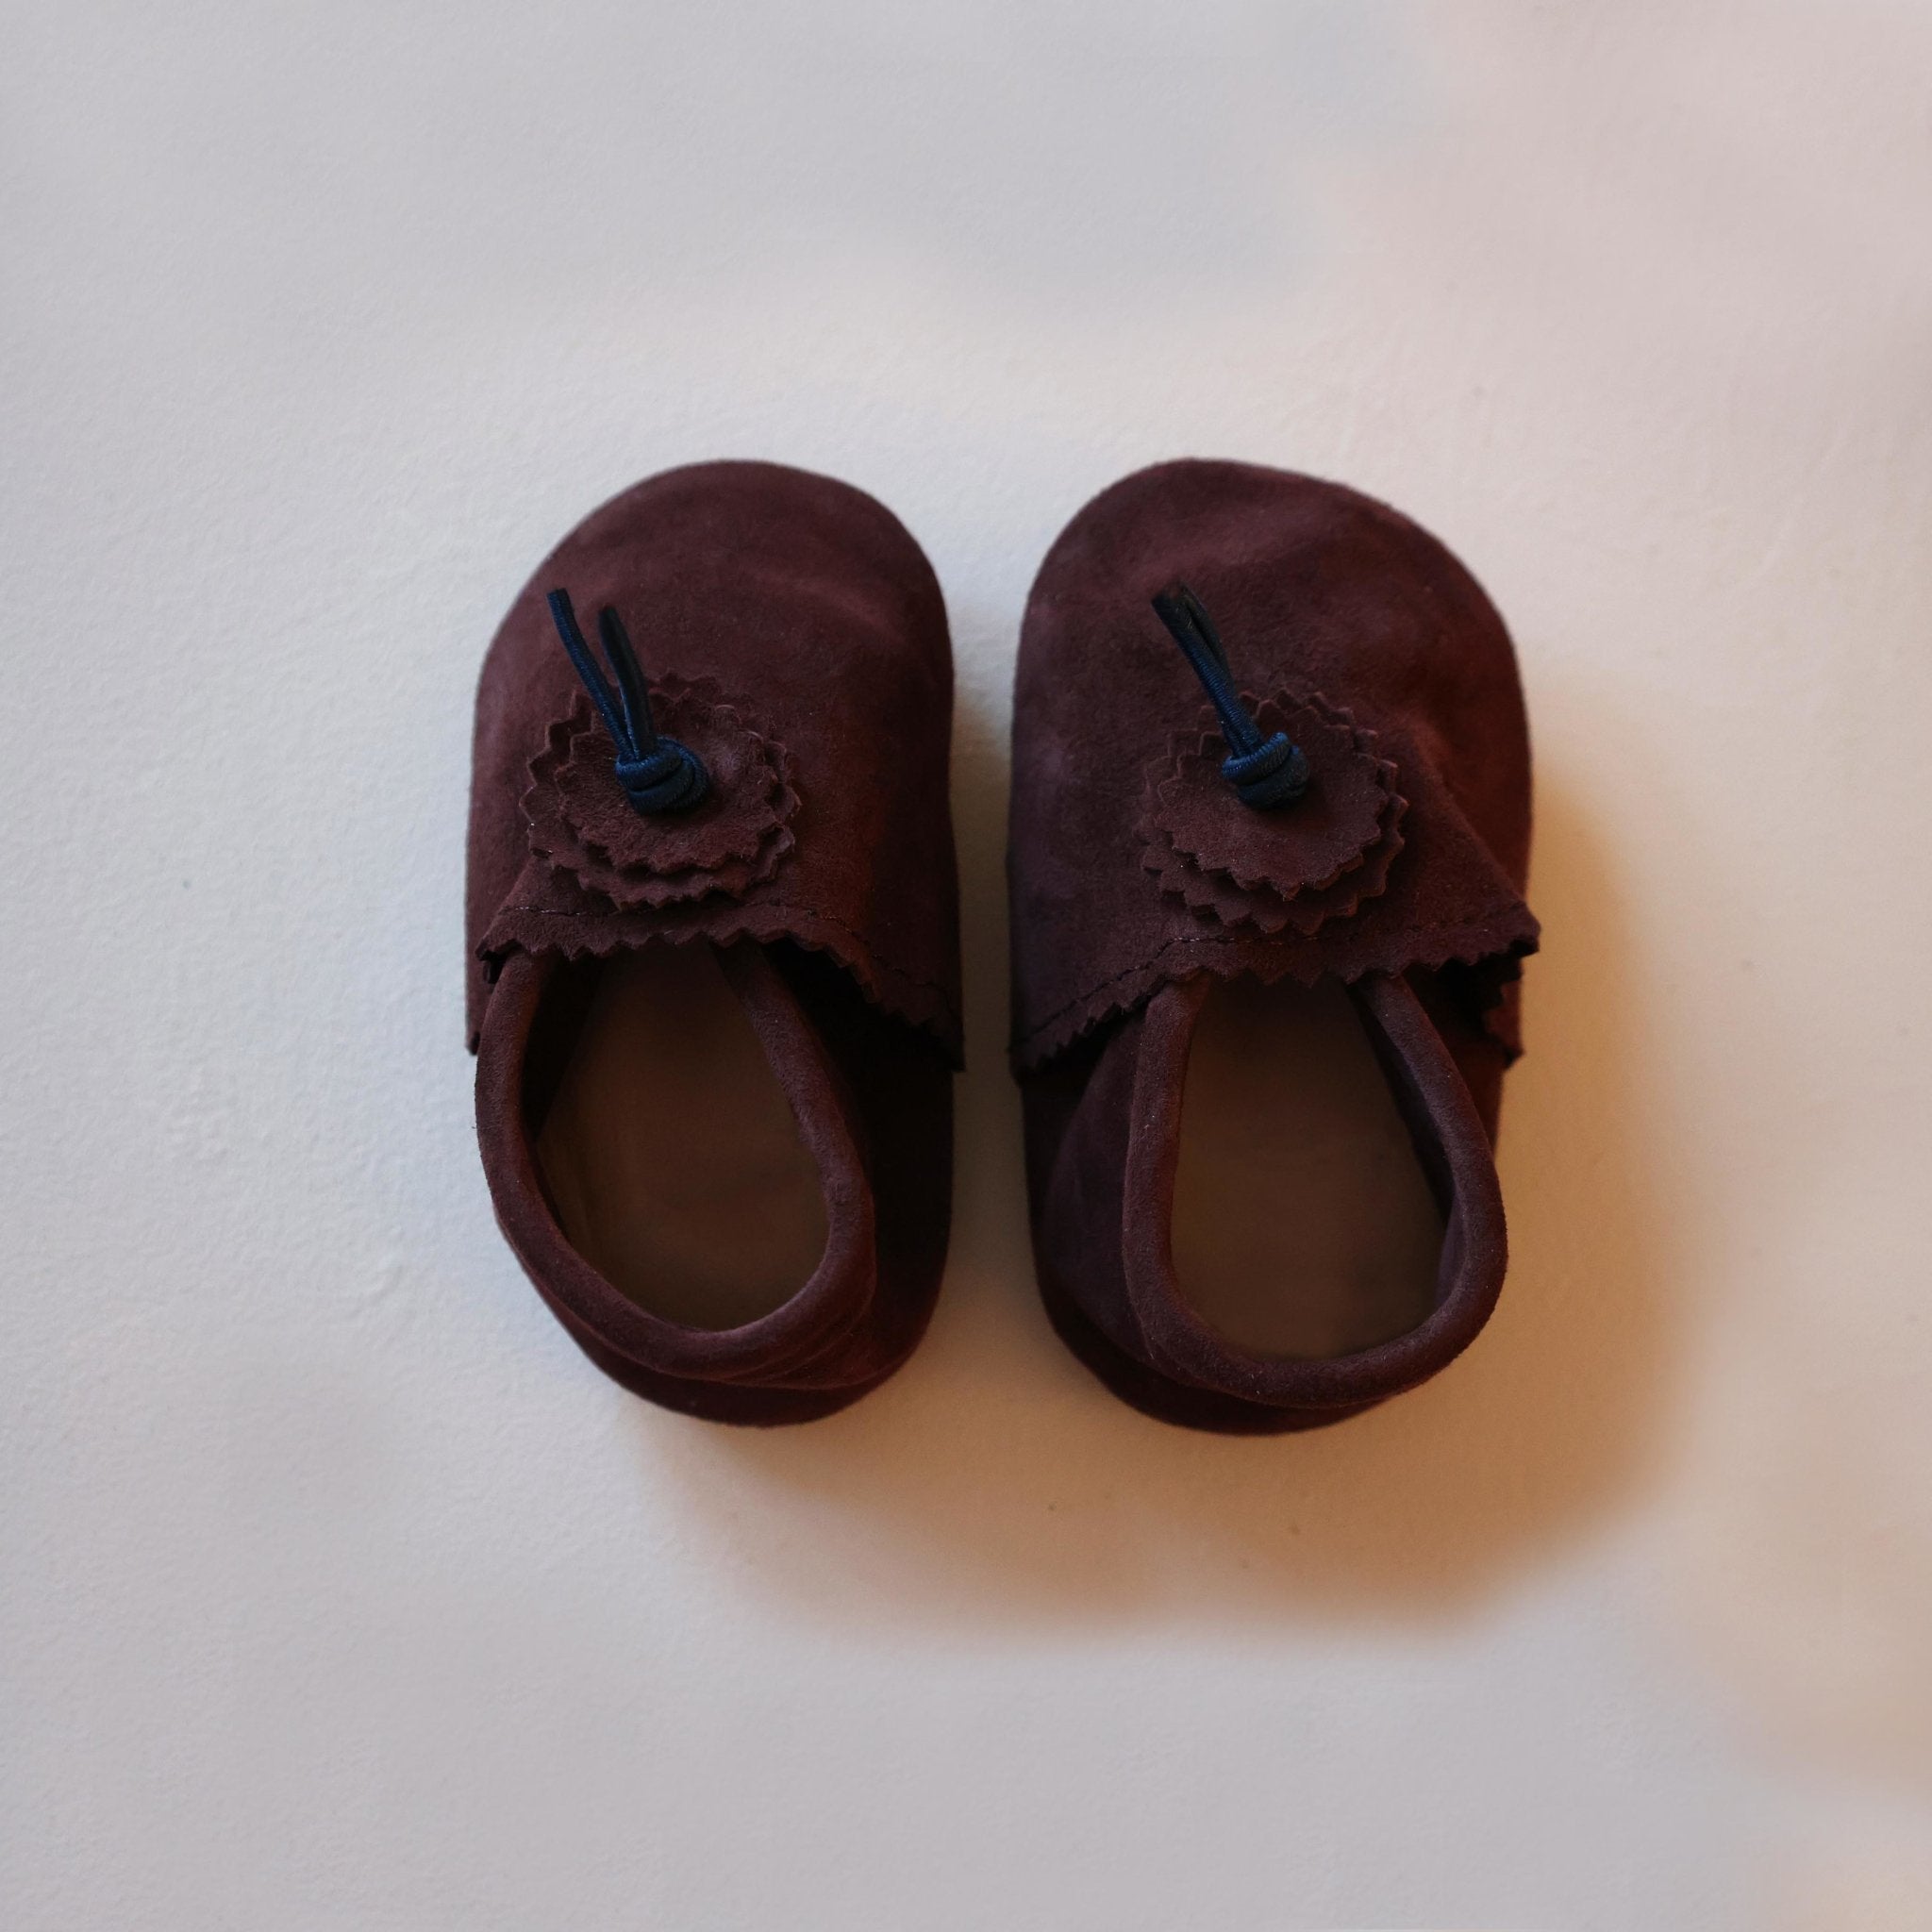 Suede Baby Slippers - Chocolate - Artisan Stories